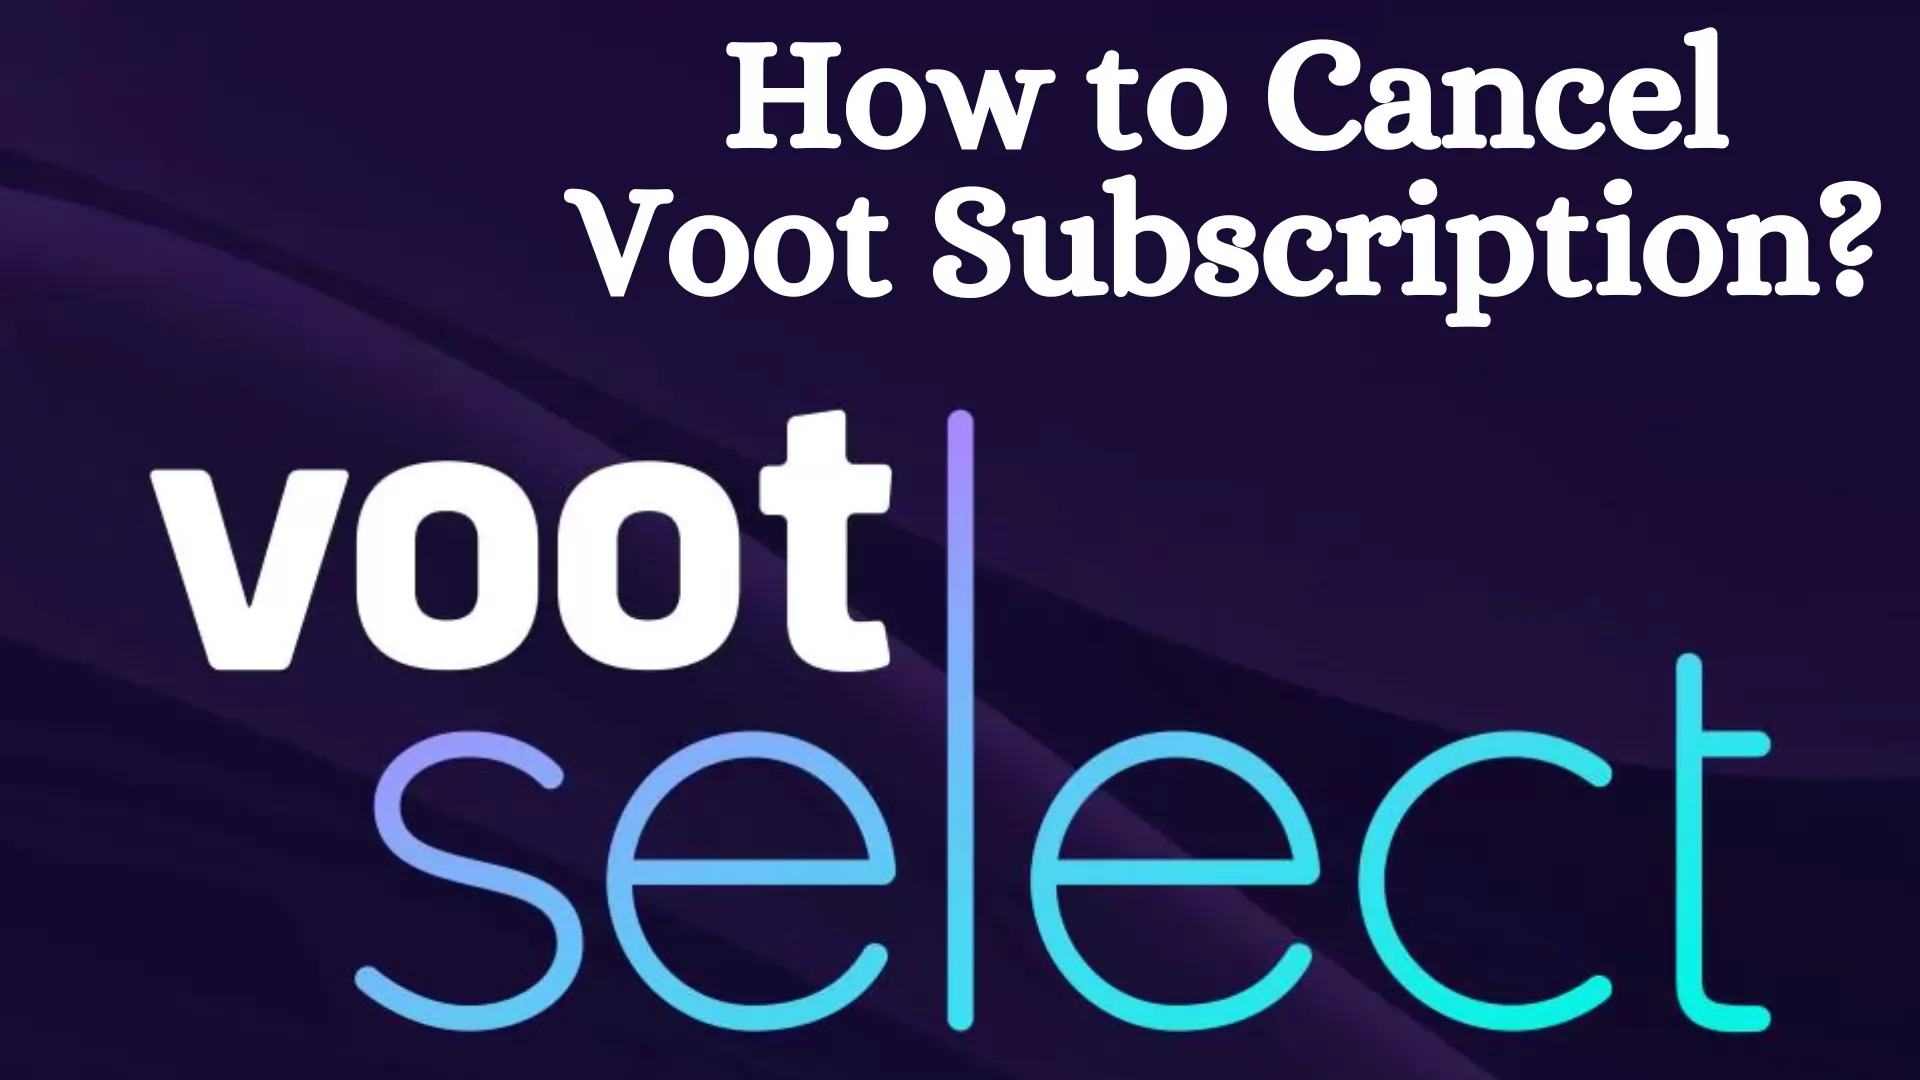 How to Cancel Voot Subscription?